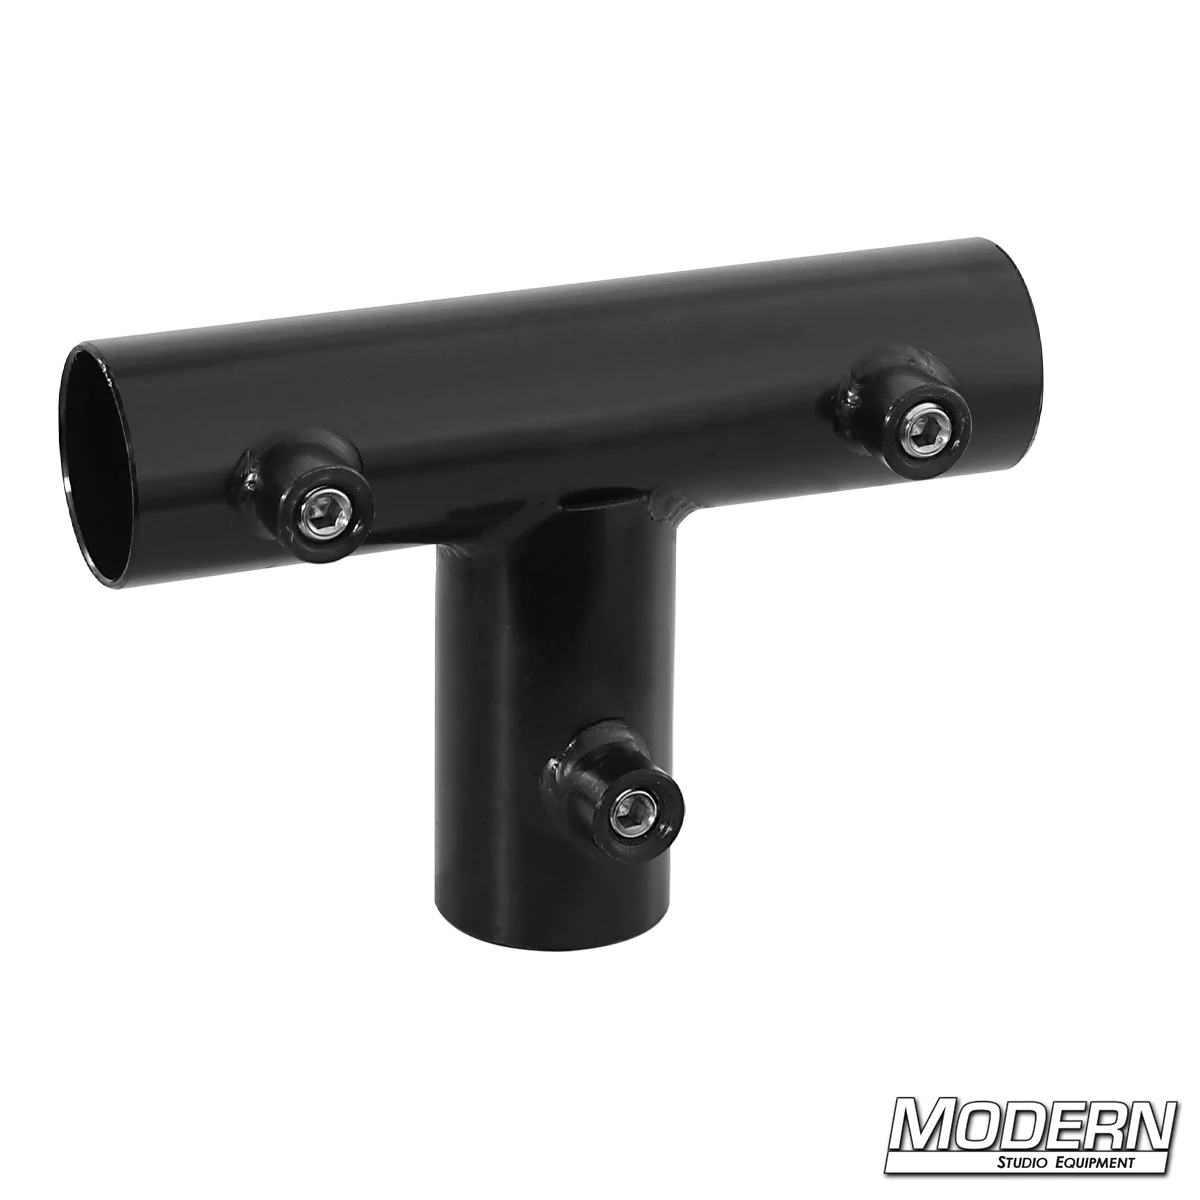 Tee for 1" Round Pipe - Black Zinc with Set Screws